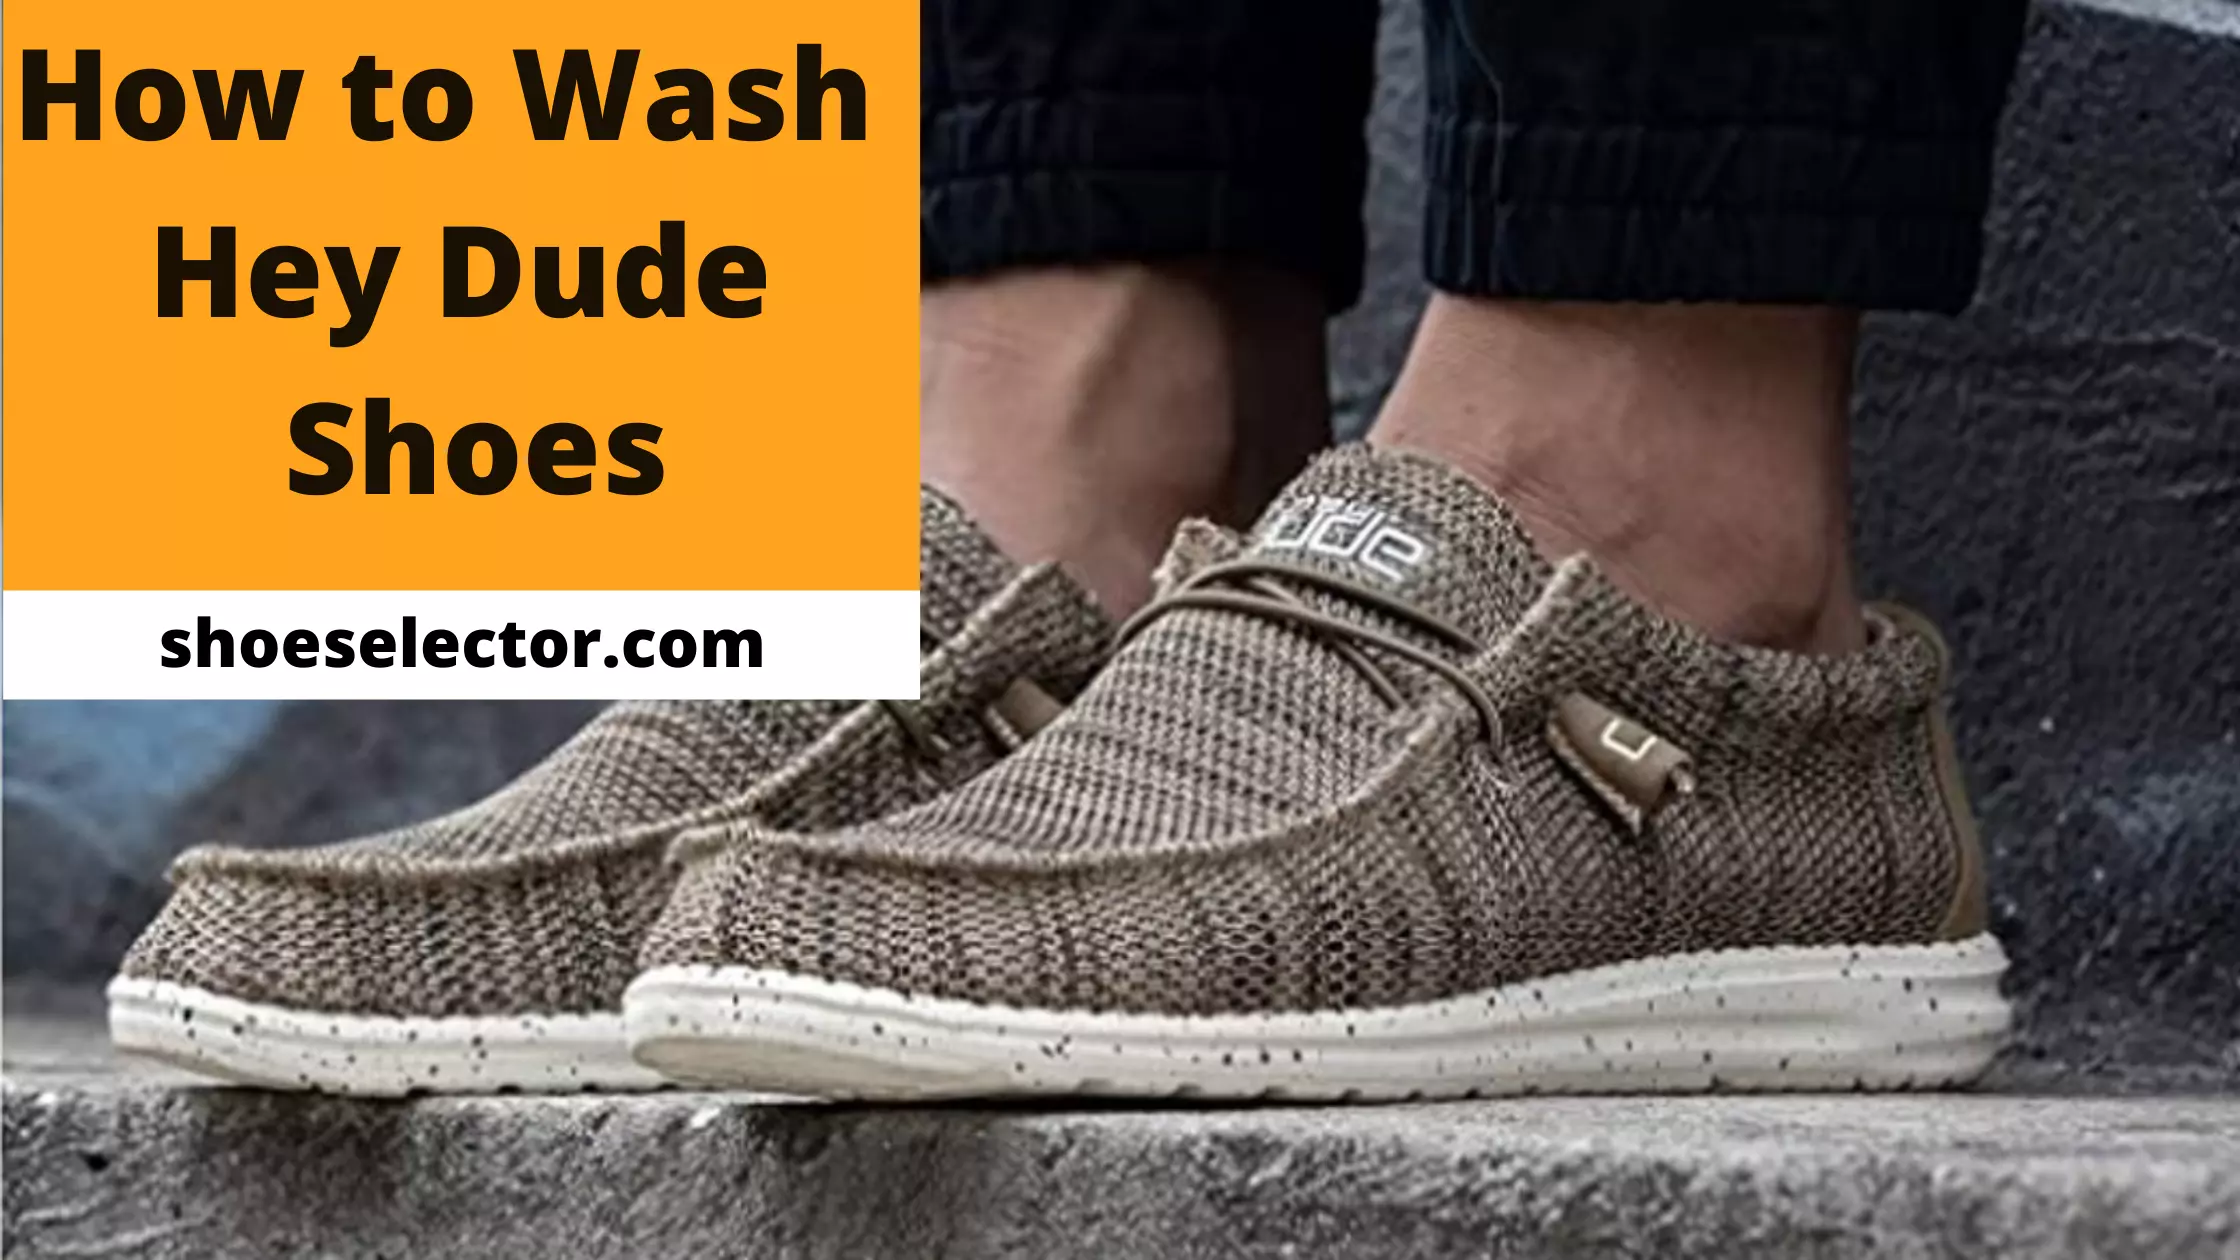 How To Wash Hey Dude Shoes? Step by Step Guide